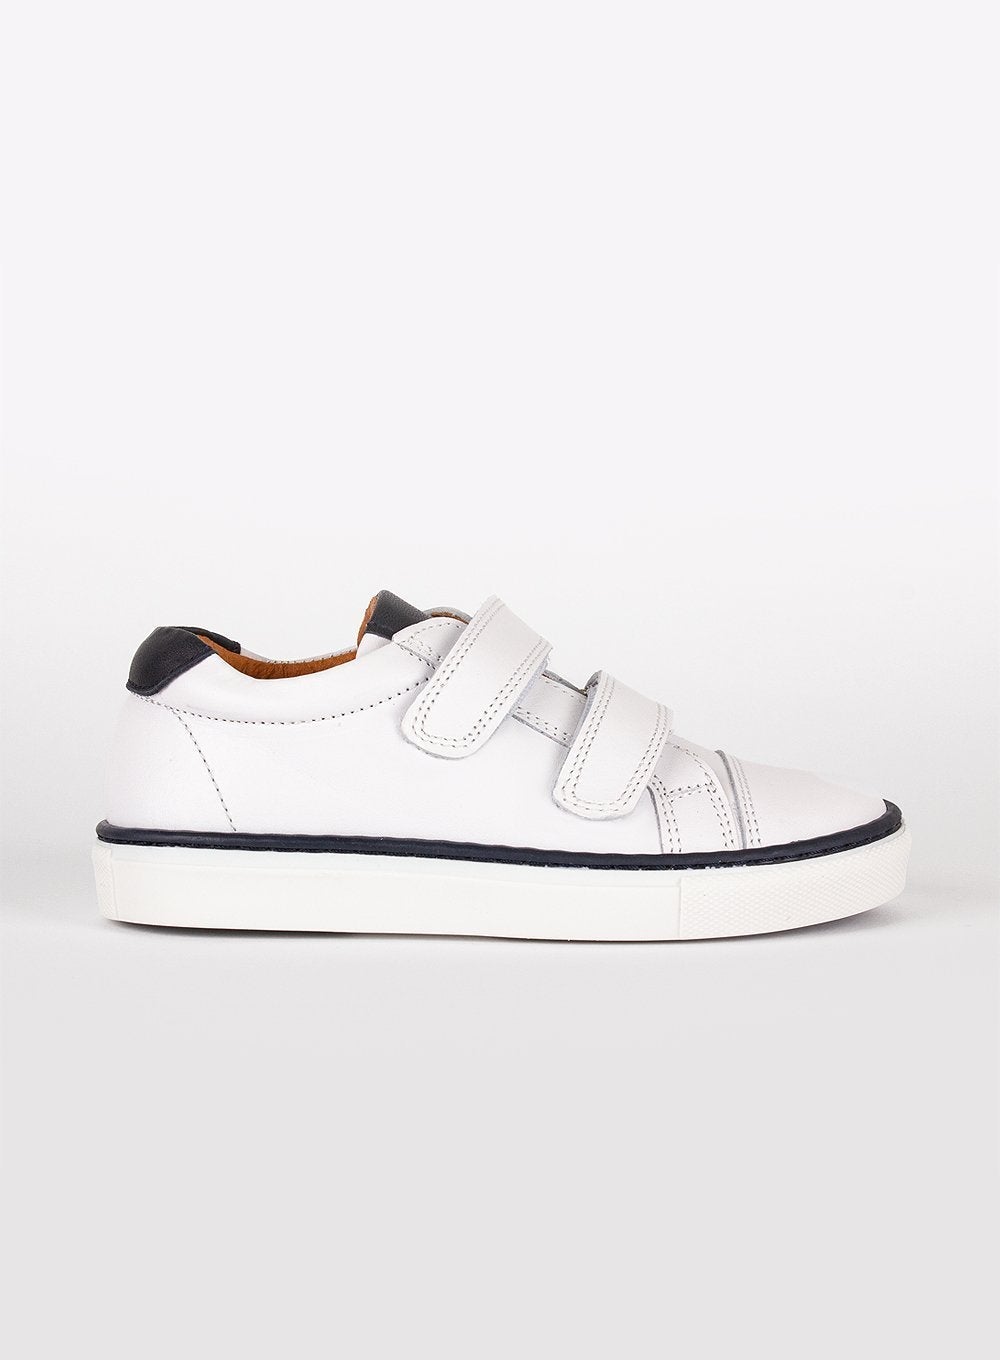 Hampton Classics Charlie Trainers in White | Trotters